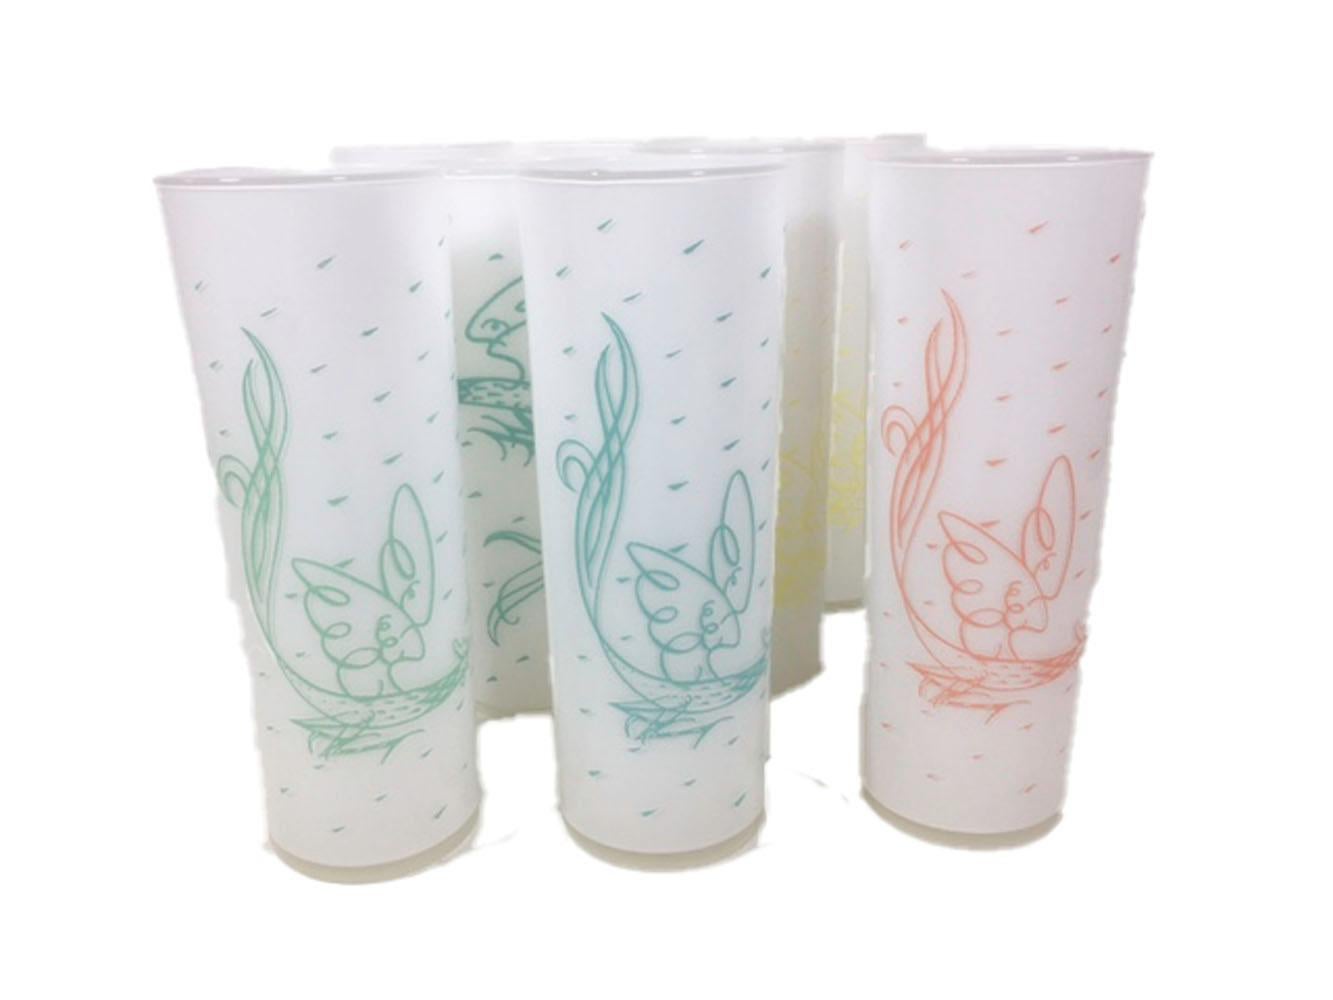 Set of 8 Fred press designed tom Collins glasses with drawings of roosters on clear glass with white frosted interior. Each glass is decorated in one of four colors, two of each color make the set. All in excellent condition.